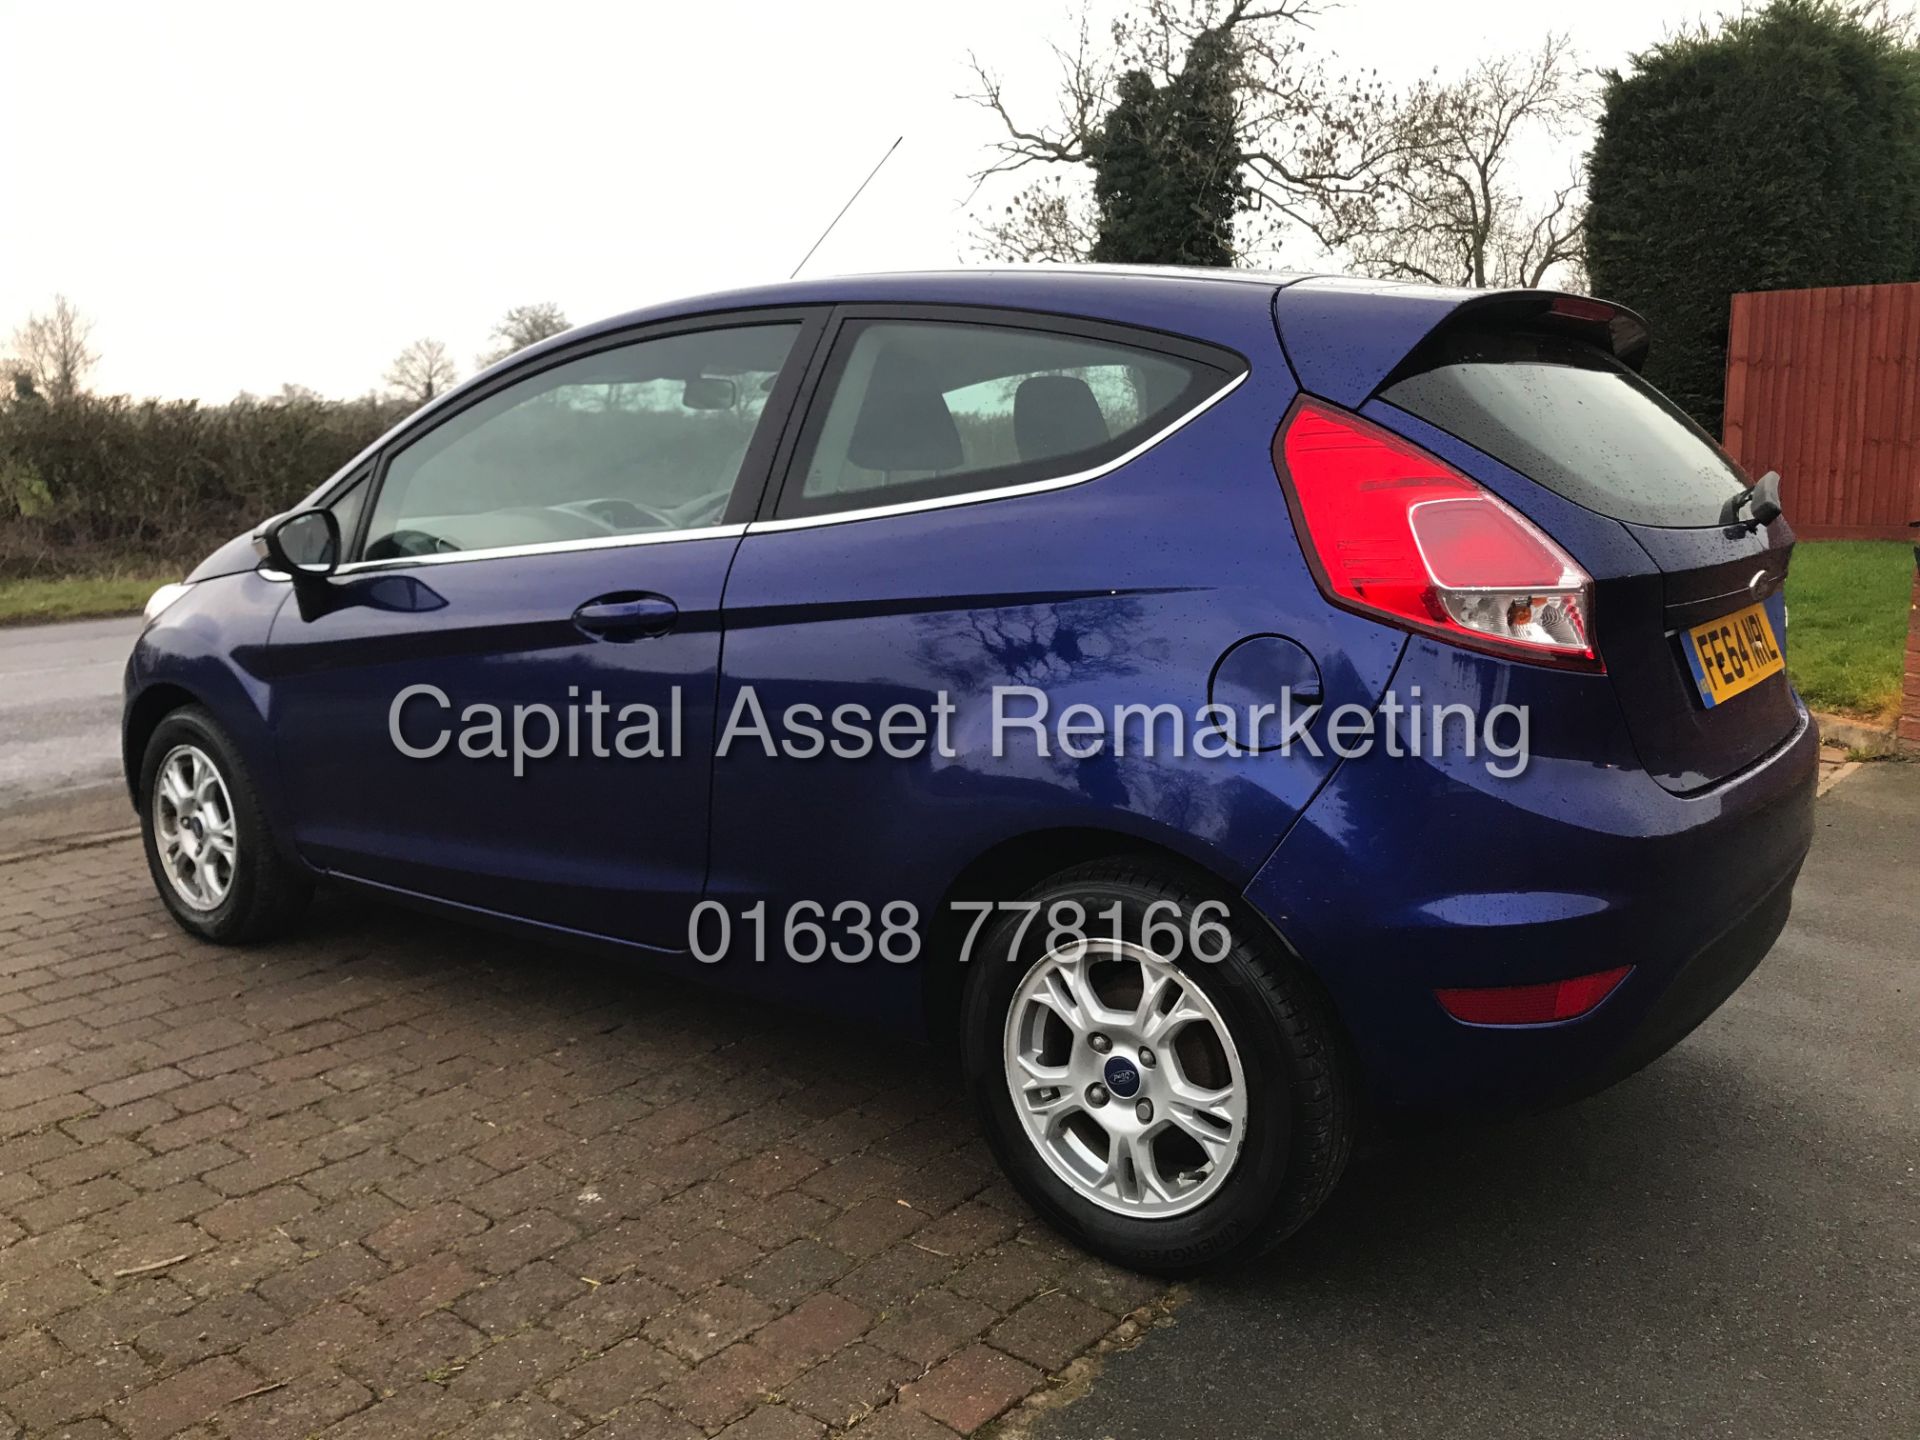 ON SALE FORD FIESTA 1.6TDCI "ZETEC ECONETIC" 1 OWNER FSH (2015 MODEL) ZERO £ ROAD TAX - AIR CON - Image 7 of 27